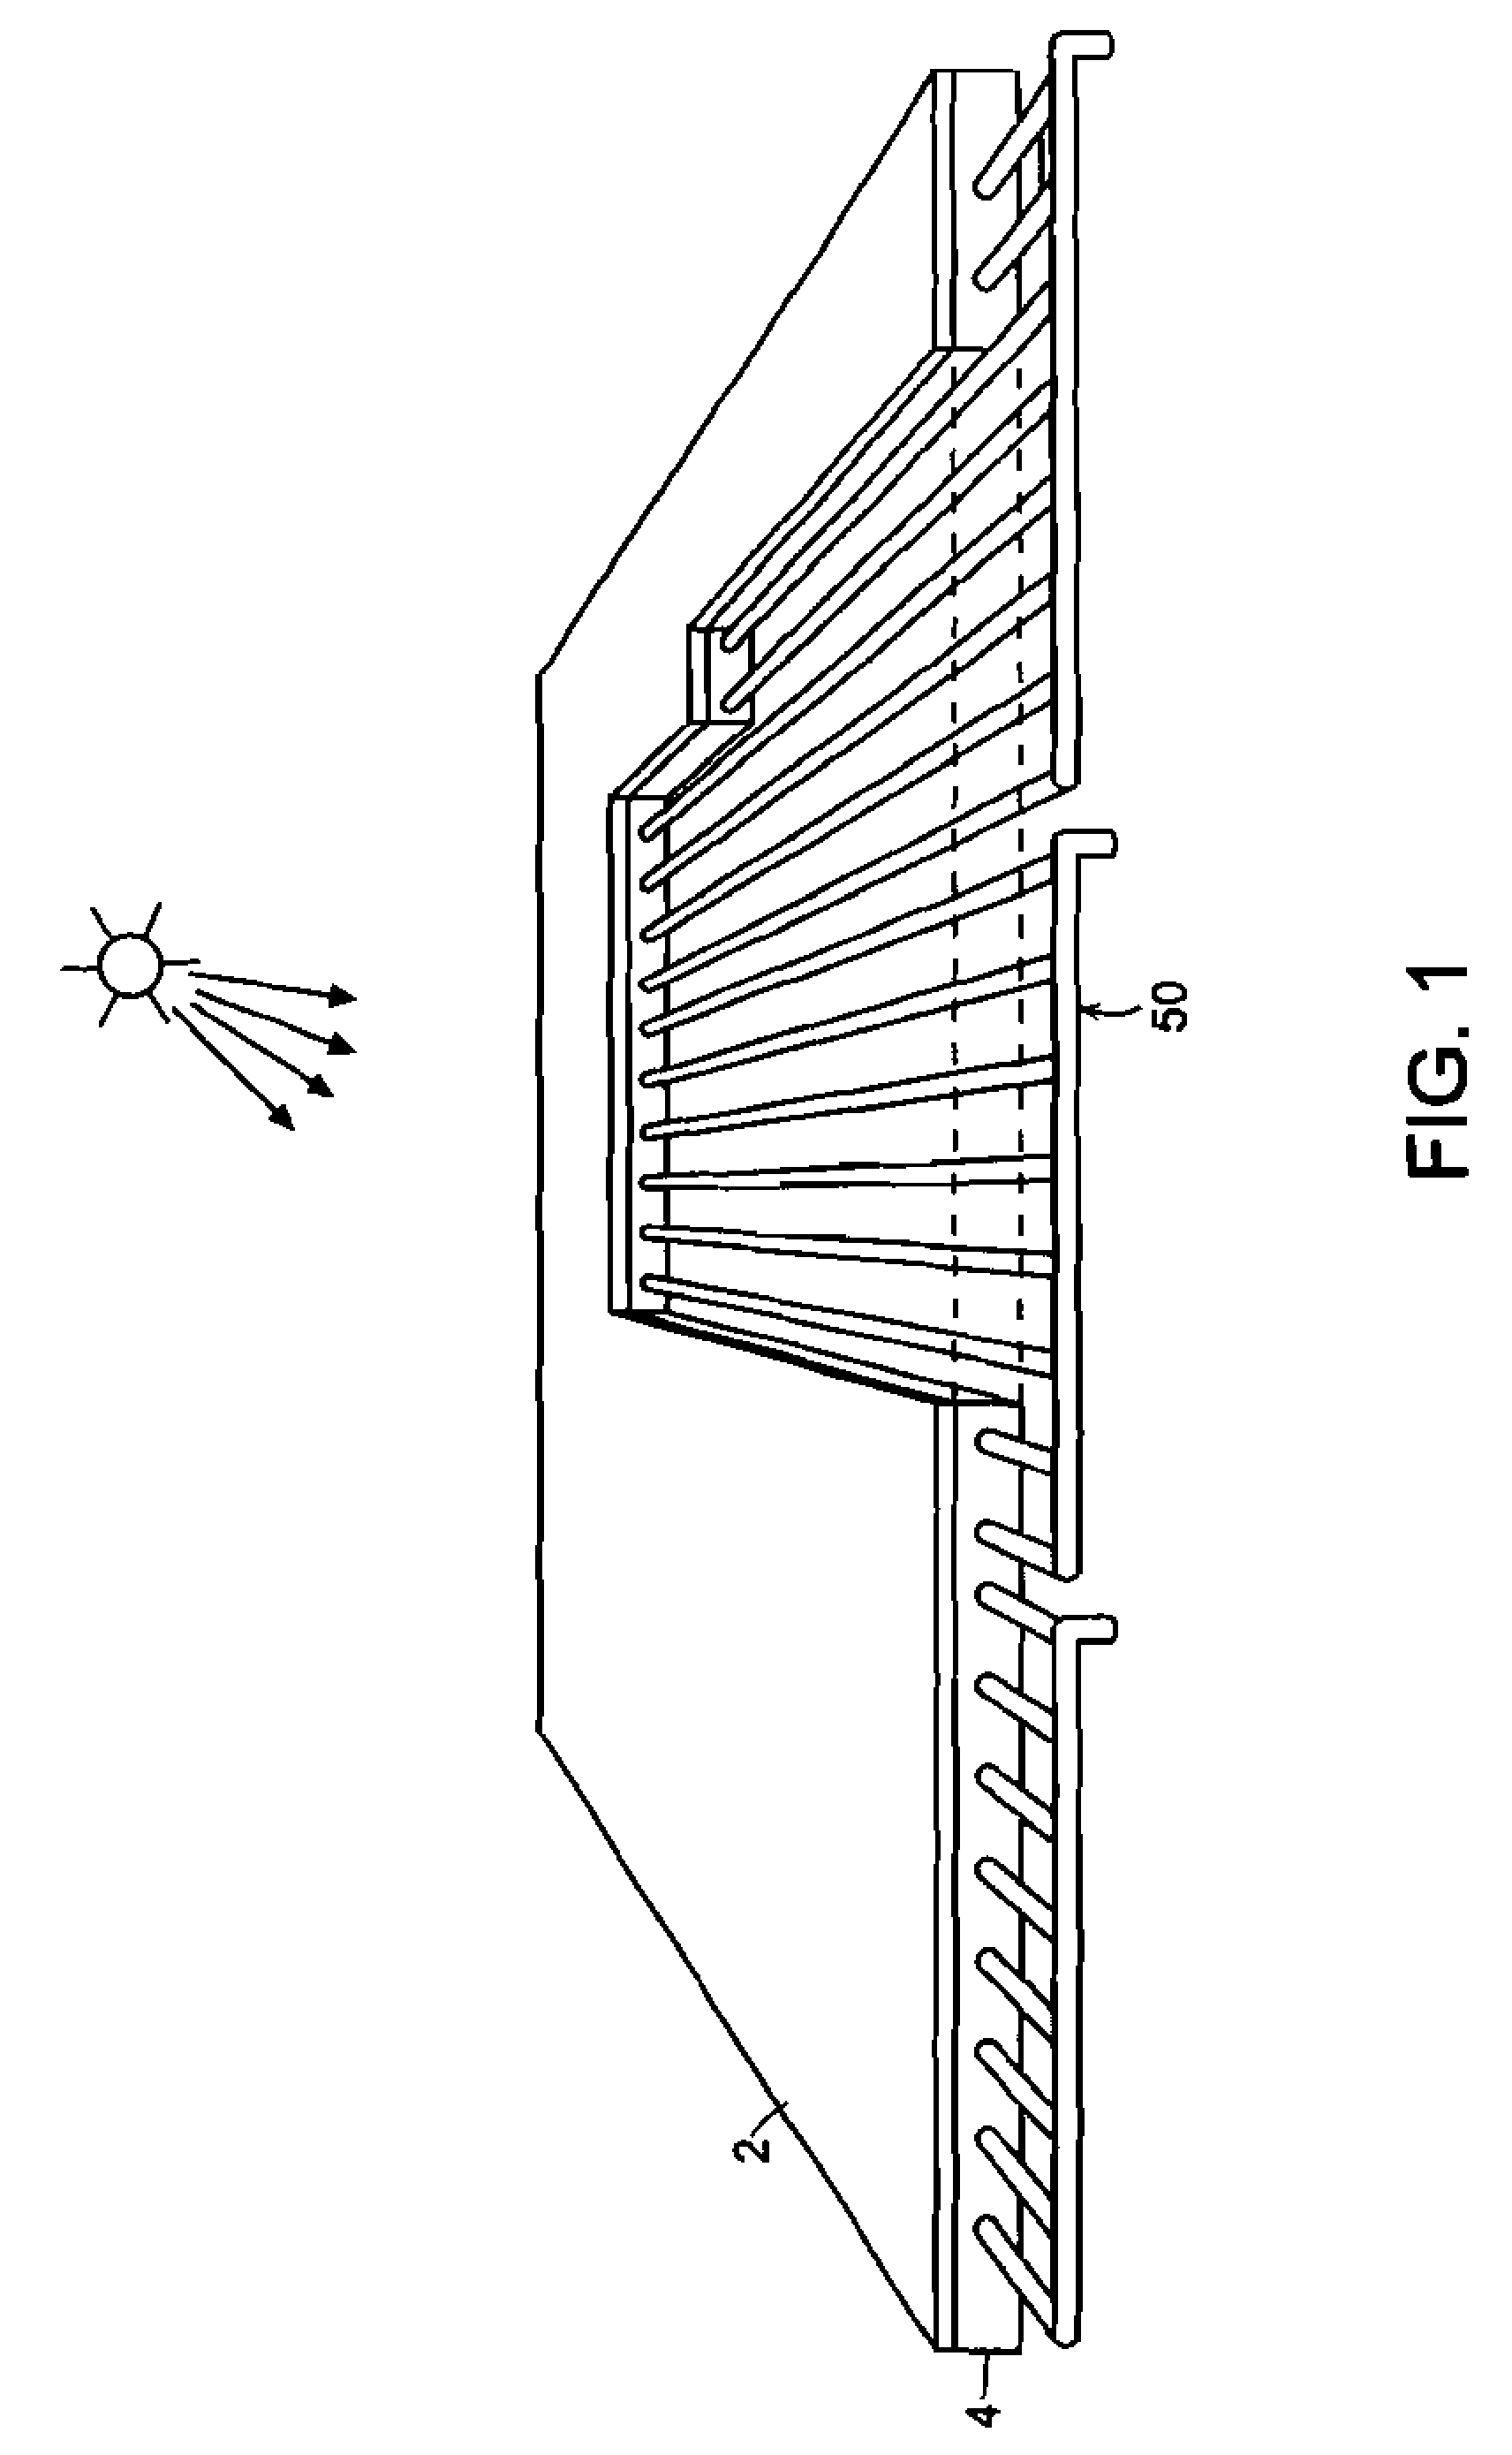 Methods of Modifying Surface Coverings to Embed Conduits Therein